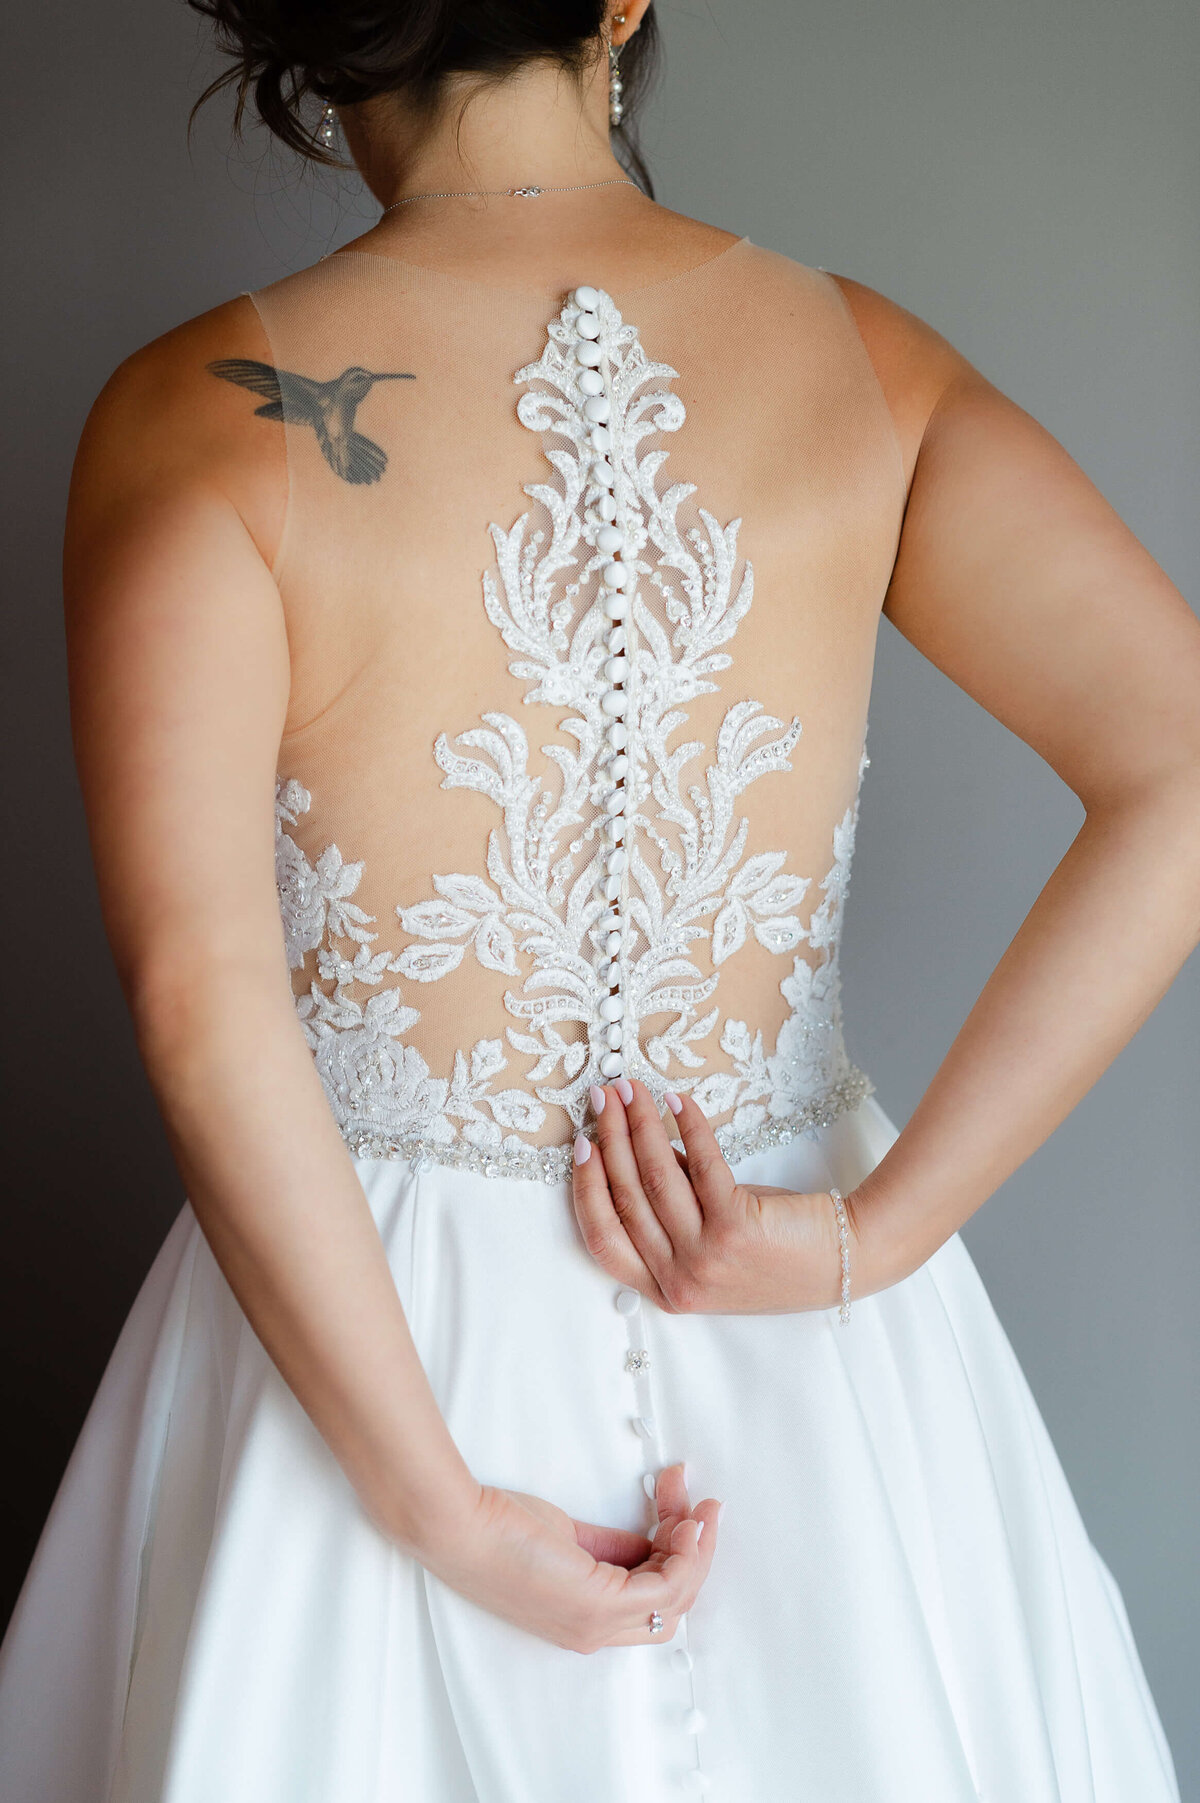 Ottawa wedding photography showing the back details of a wedding gown at the Brookstreet Hotel